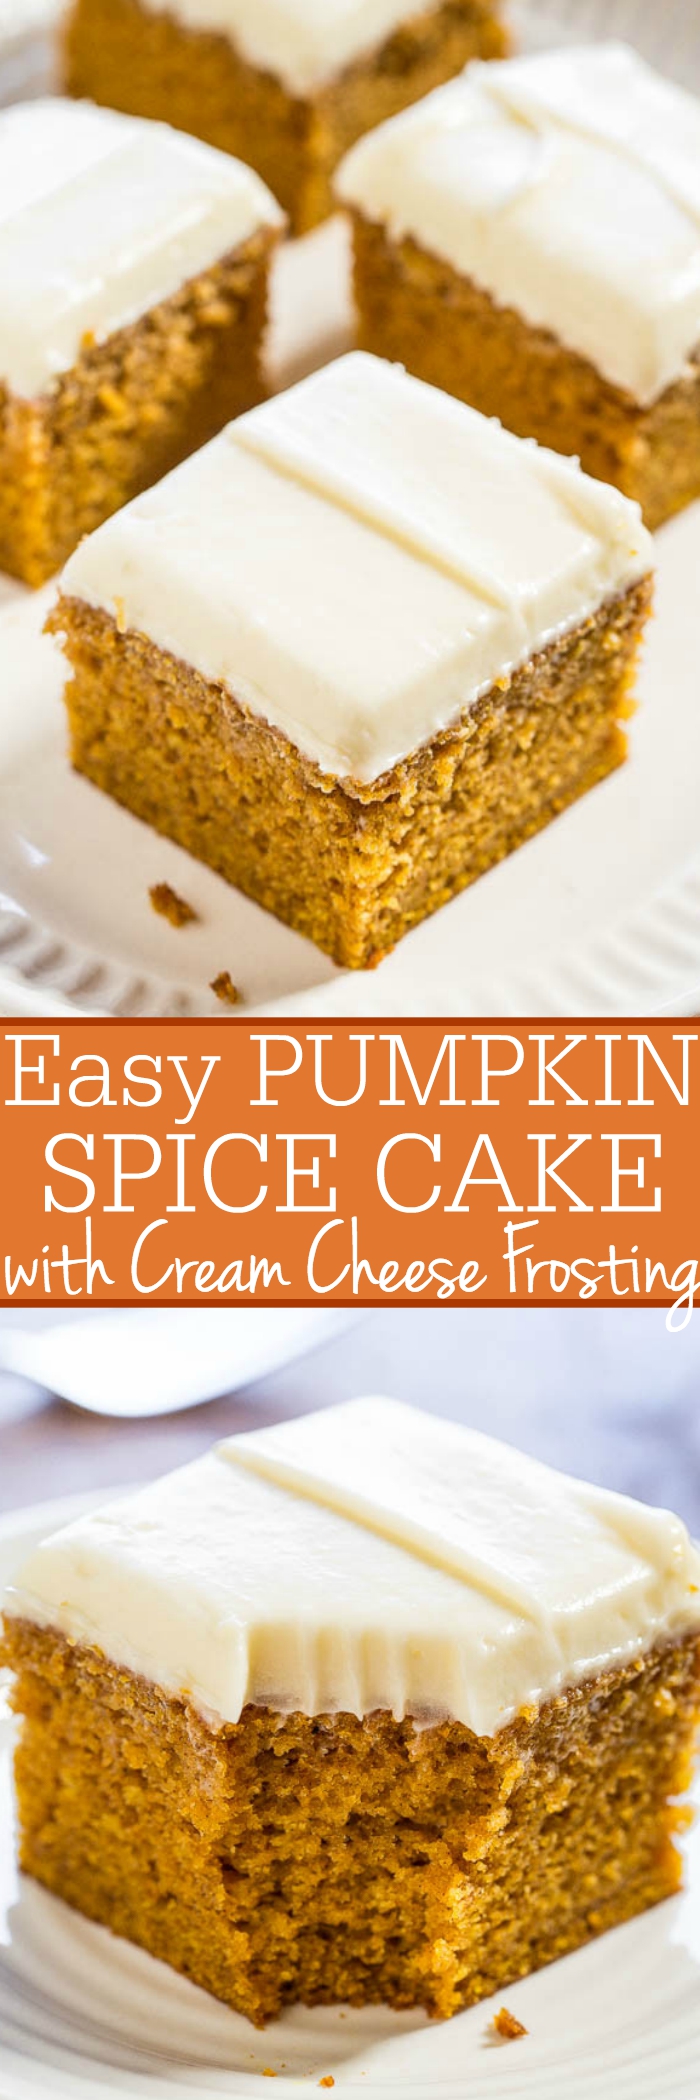 Easy Pumpkin Spice Cake with Cream Cheese Frosting - Soft, moist, and bursting with pumpkin flavor! You'll want the frosting by the spoonful!! (who needs the cake when there's luscious cream cheese frosting!)